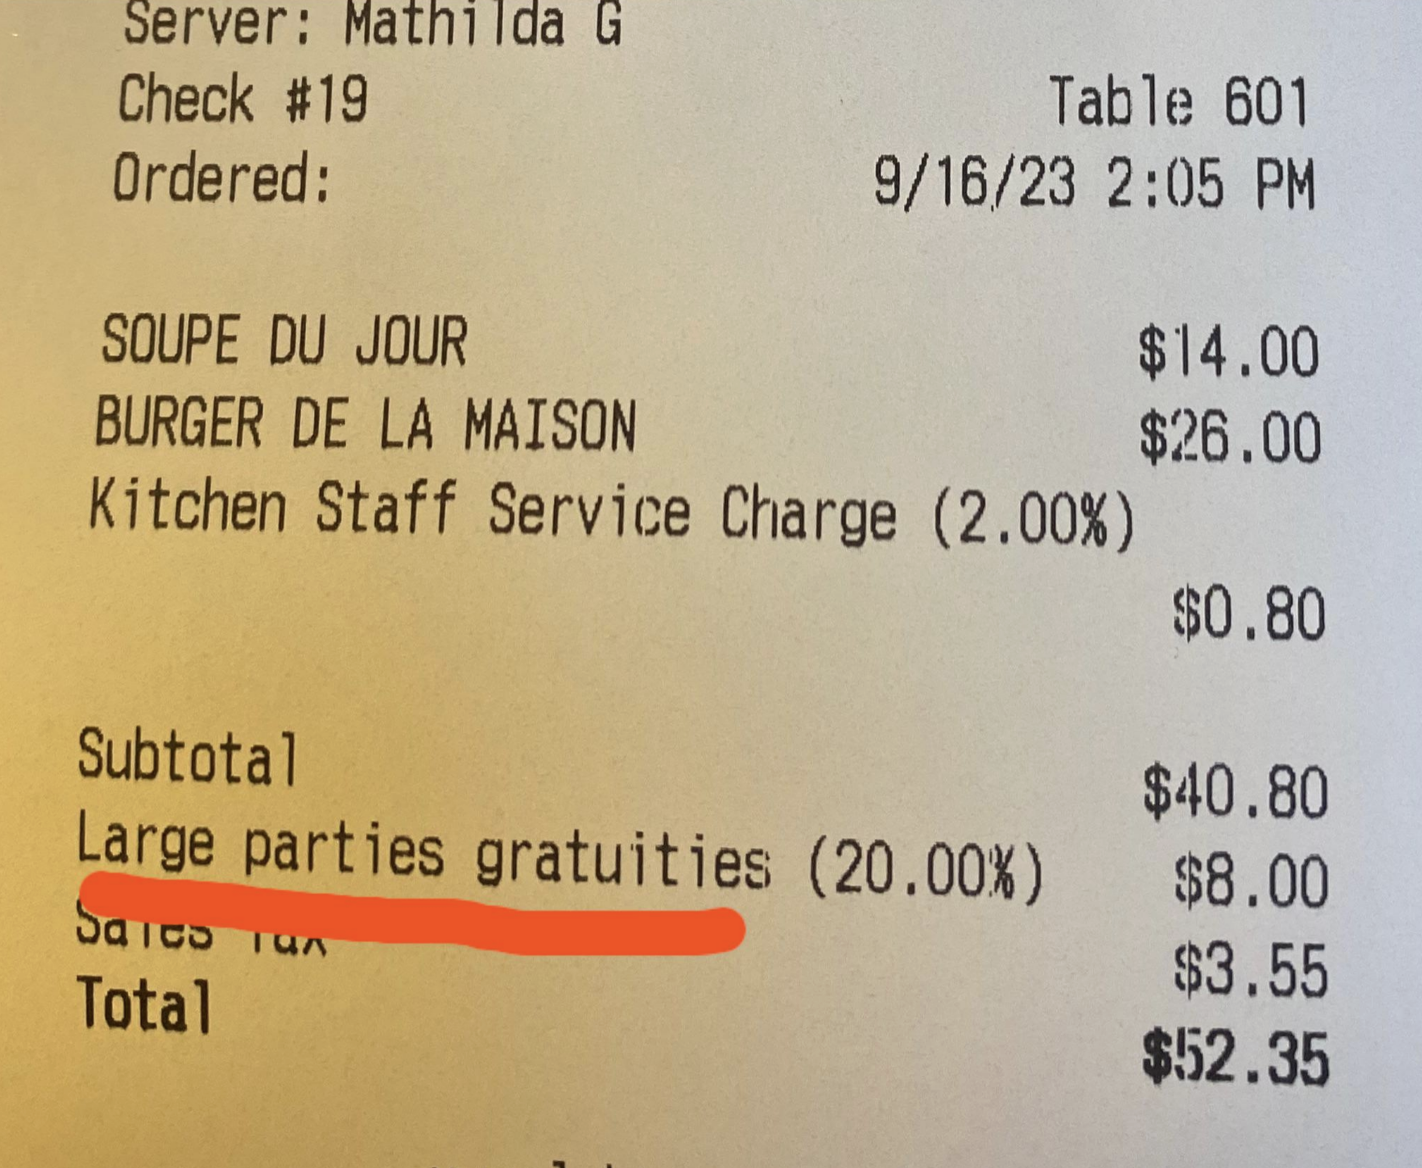 The receipt shows an $8.00 charge for &quot;large parties gratuities&quot; but only two items ordered